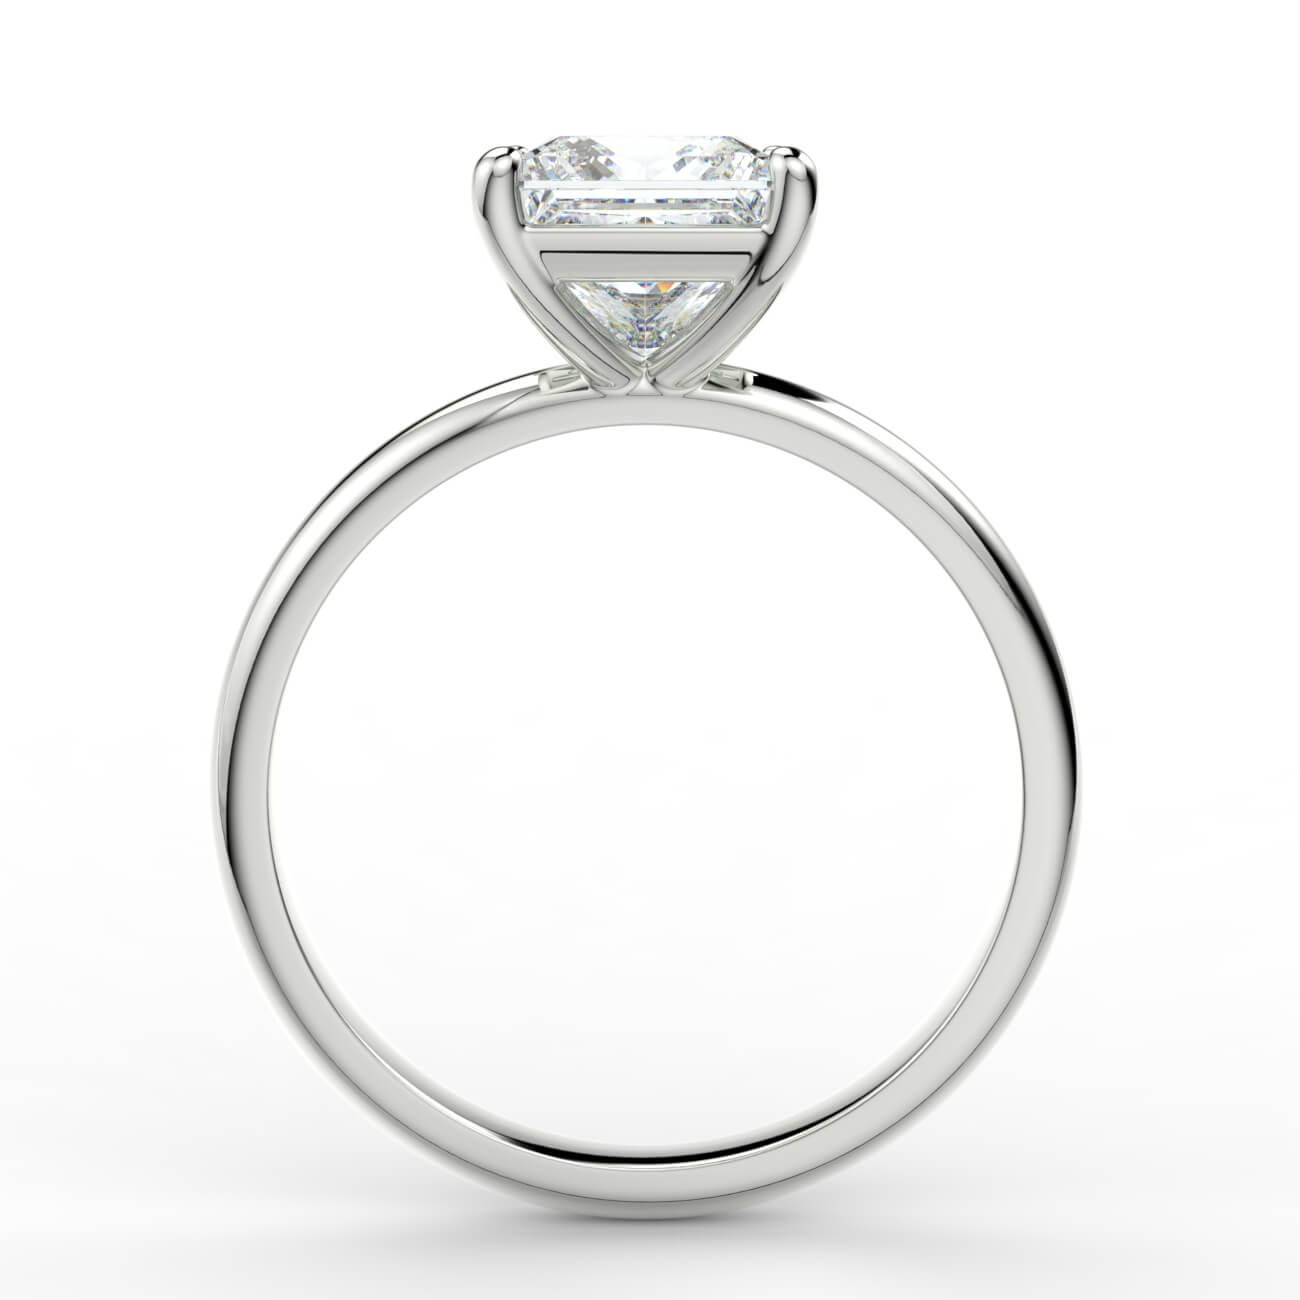 Comfort fit 4 claw princess cut solitaire diamond ring in white gold – Australian Diamond Network